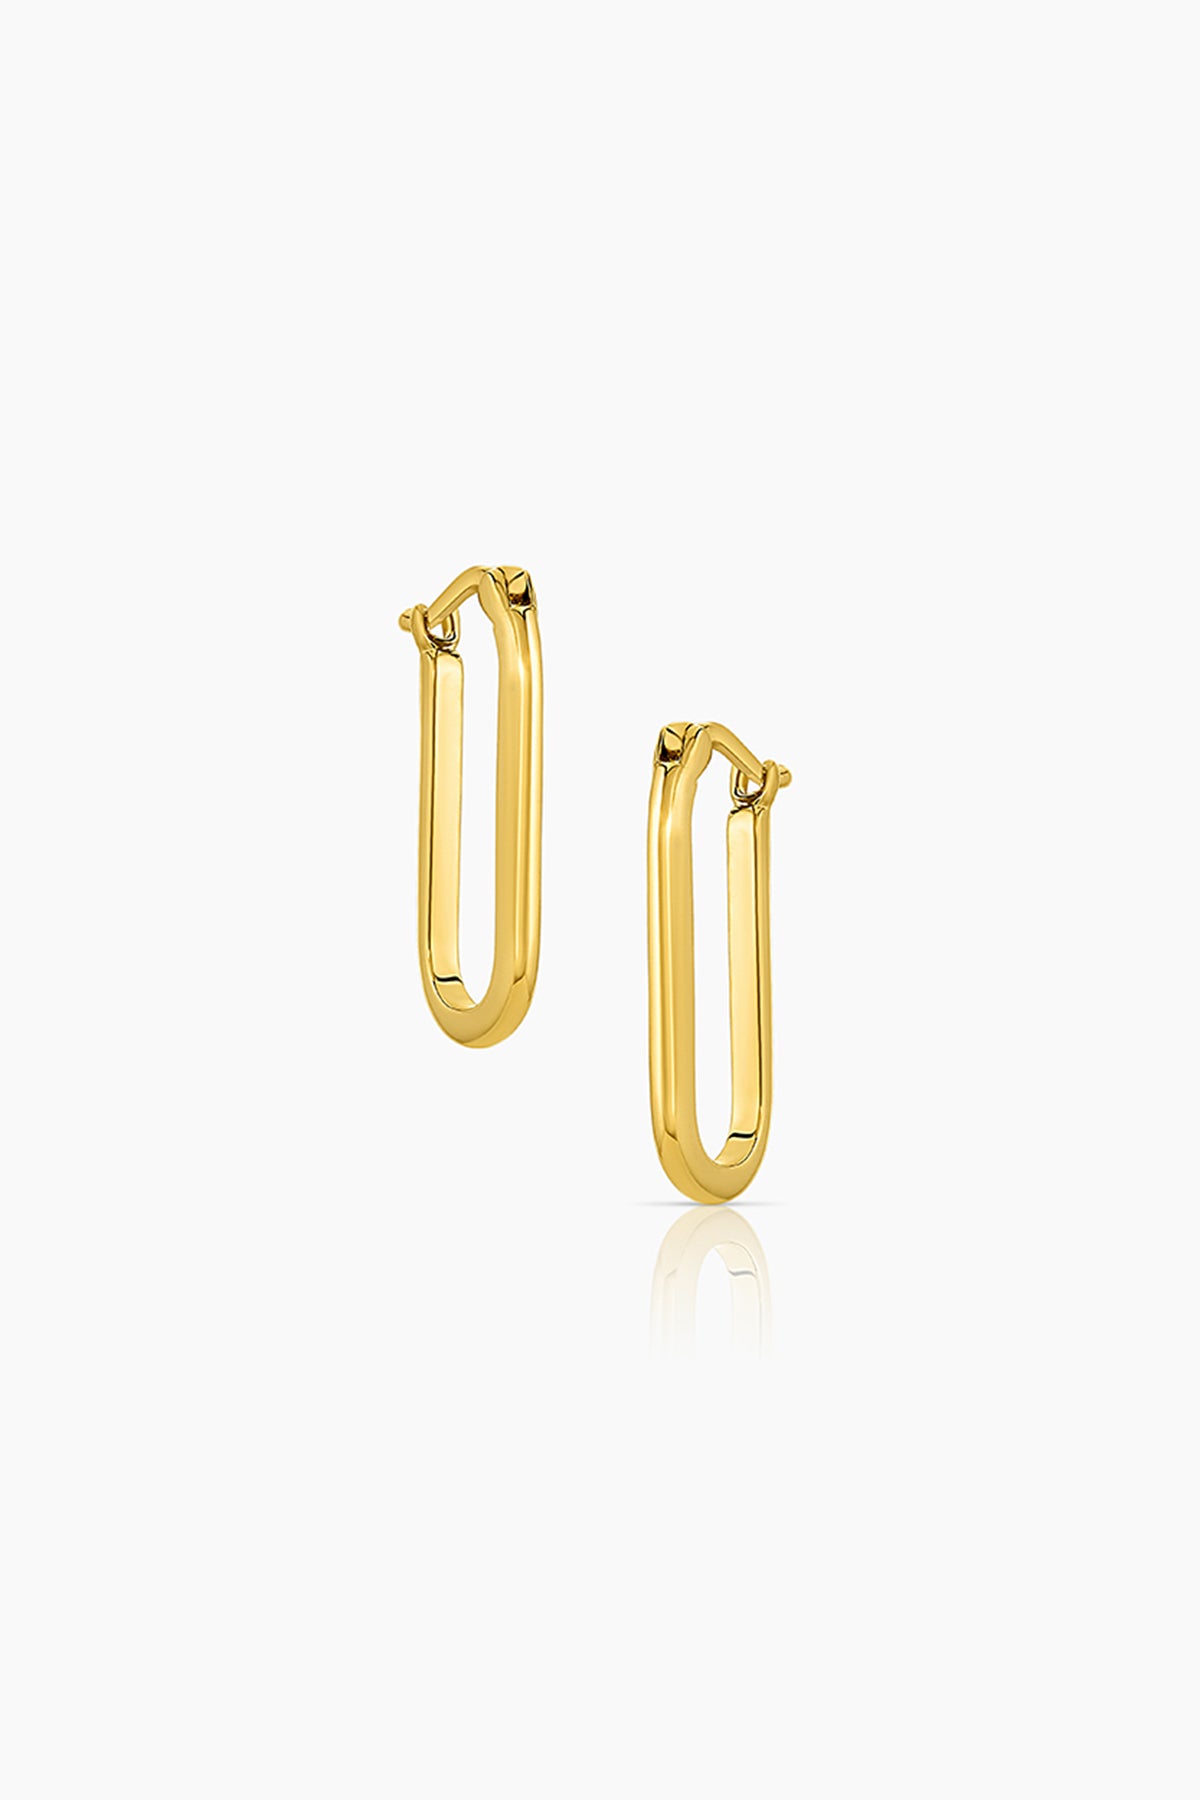 A pair of NADINE ELONGATED HOOPS BY THATCH on a white background.-35526313771201